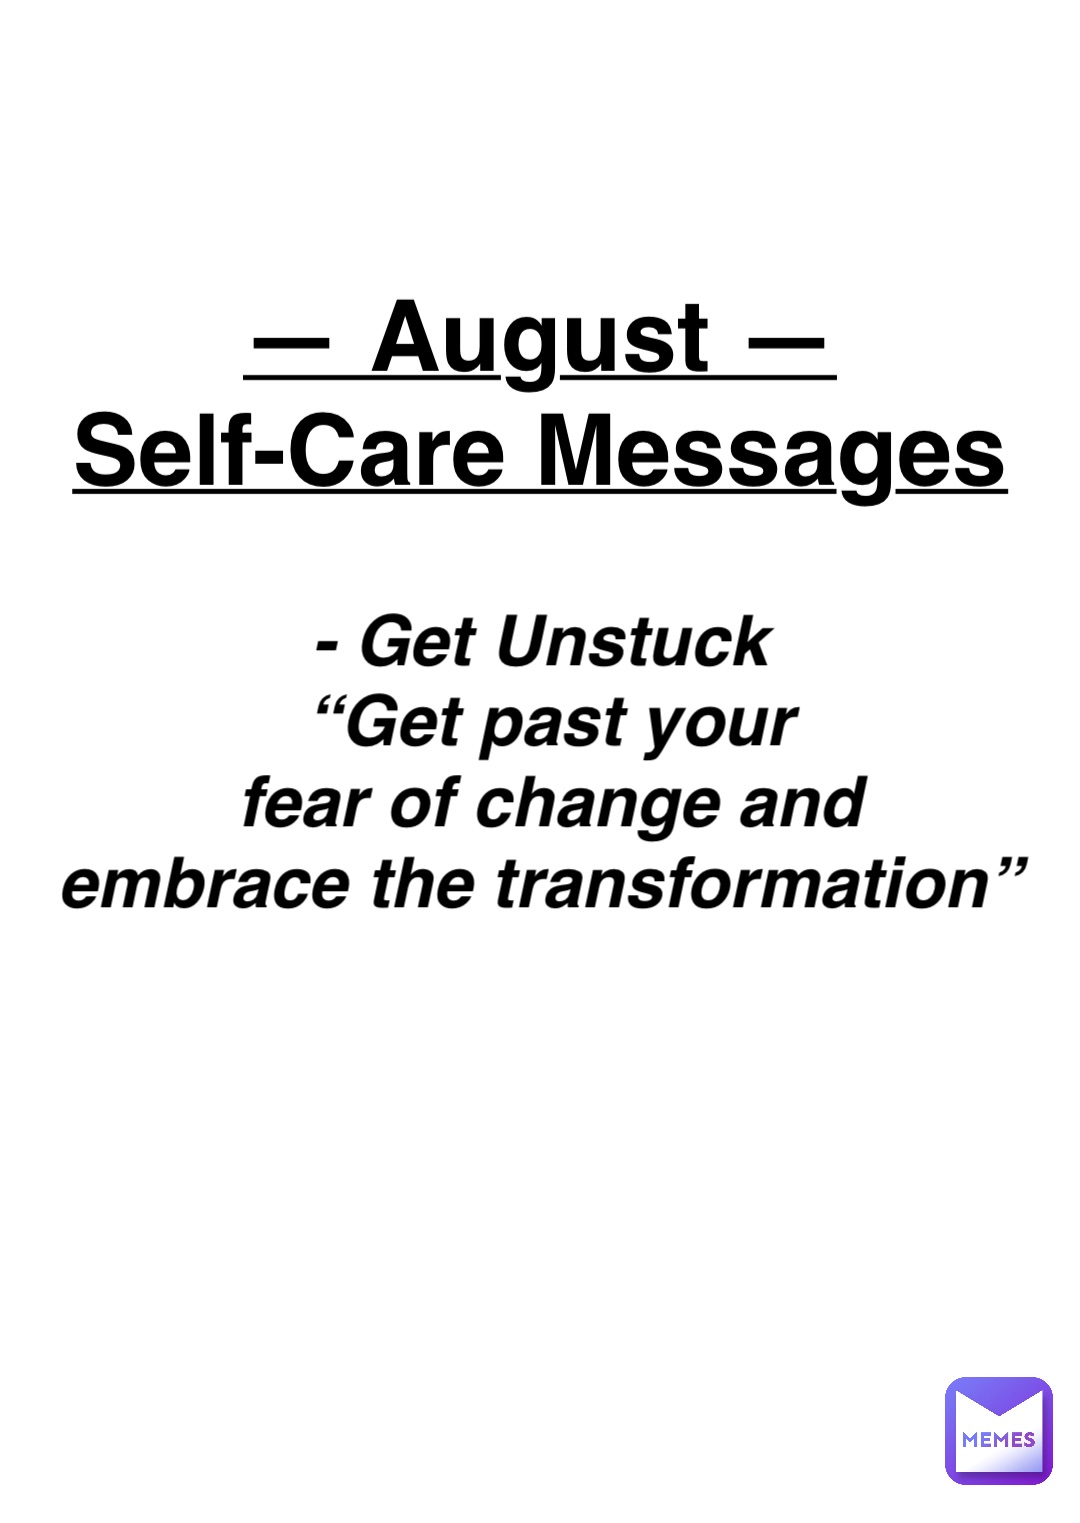 Double tap to edit — August —
Self-Care Messages - Get Unstuck
“Get past your 
fear of change and 
embrace the transformation”